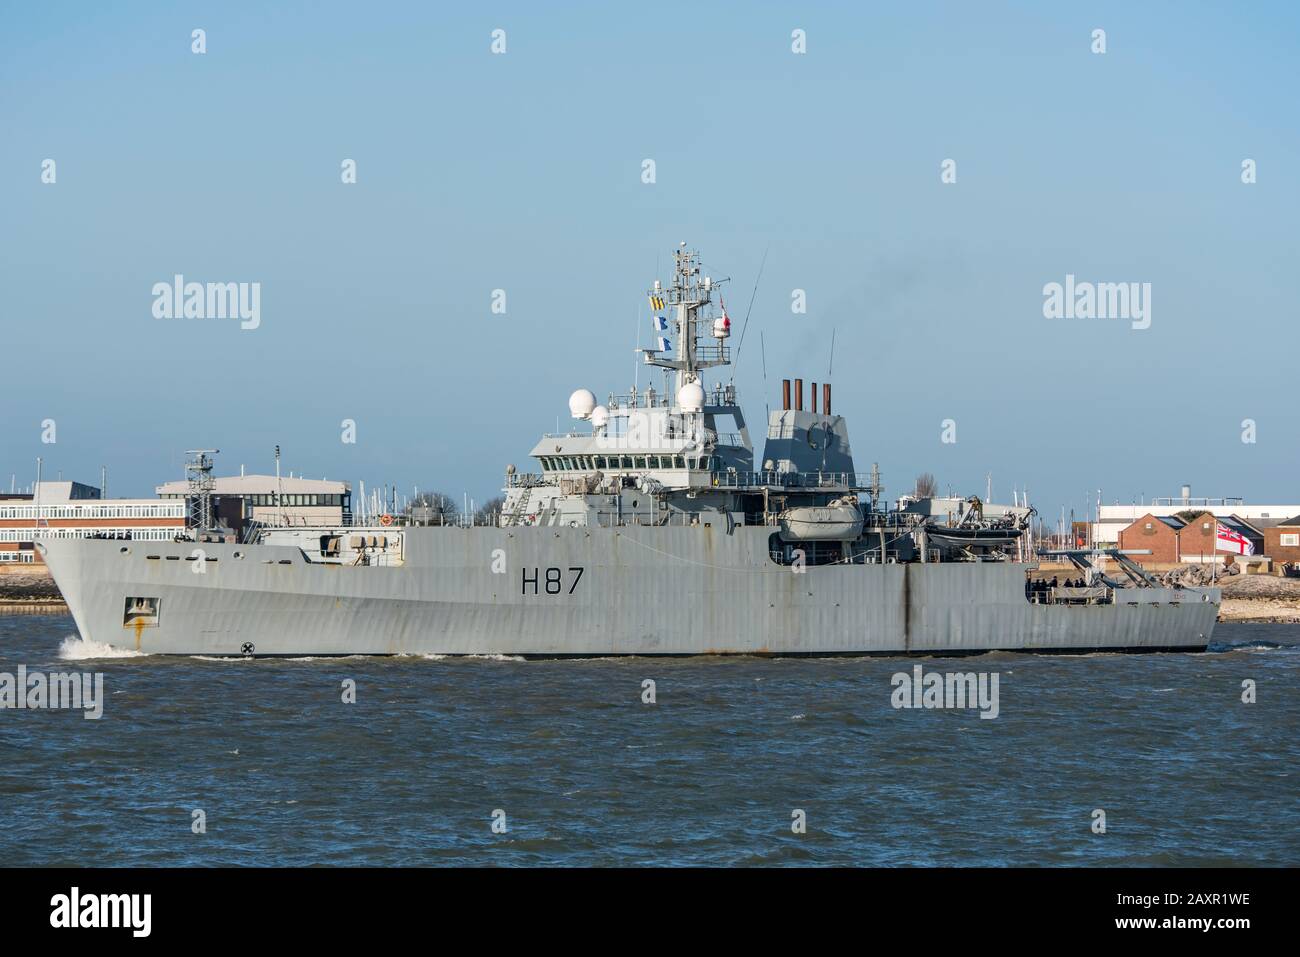 The Royal Navy Hydrographic Survey And Research Ship Hms Echo H87 In The Solent After Leaving Portsmouth Uk On The 12th February Stock Photo Alamy